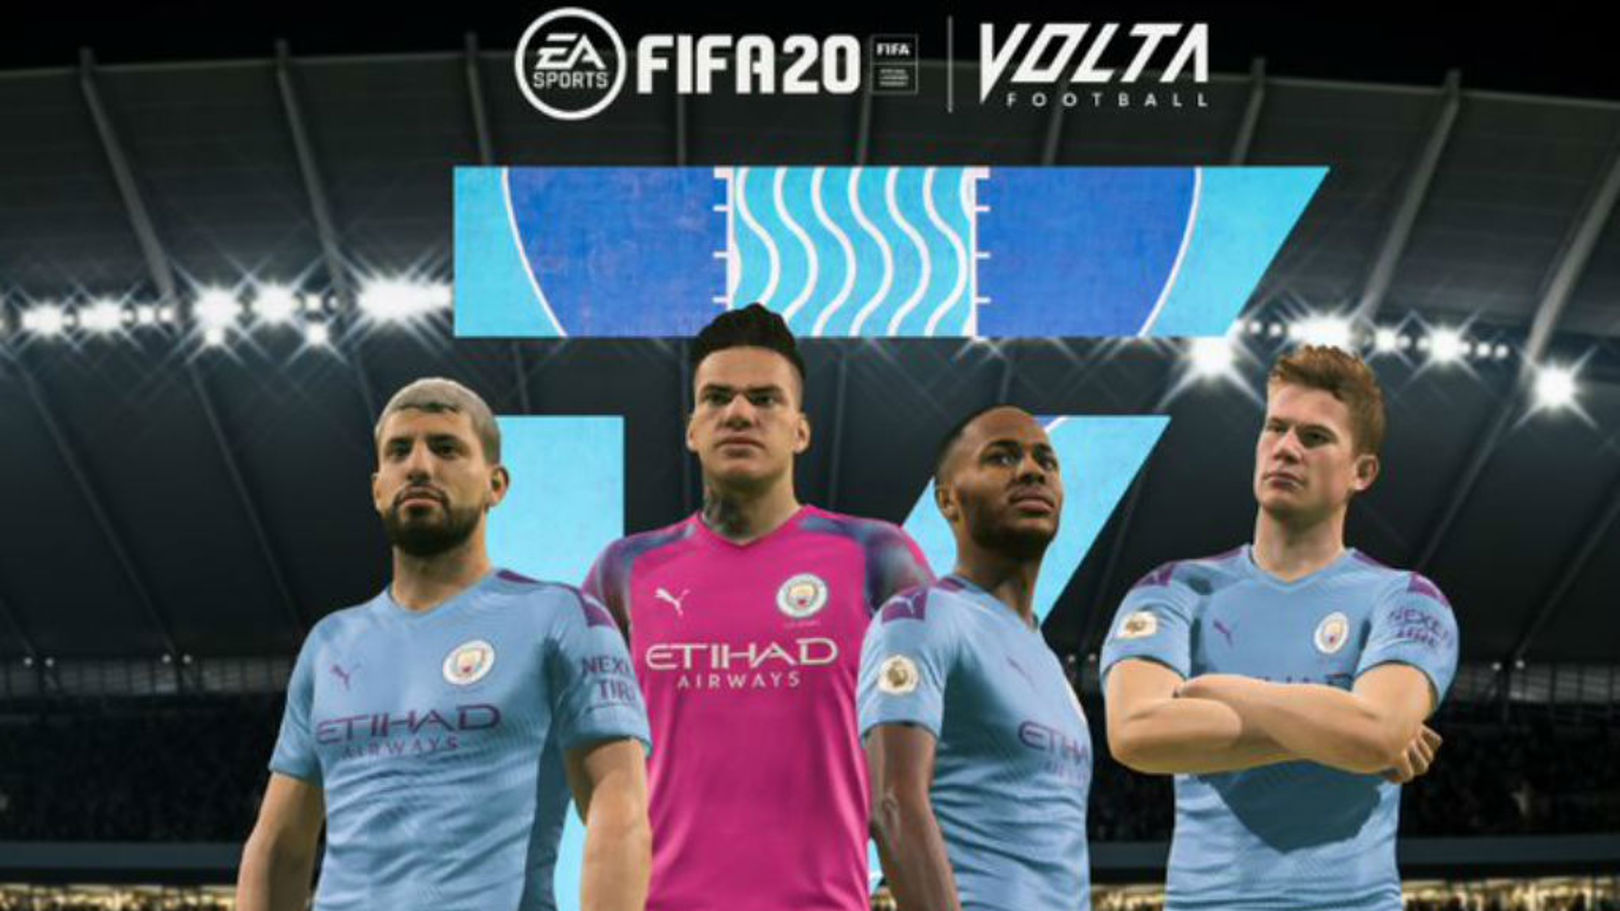 CFG announces global partnership with EA Sports